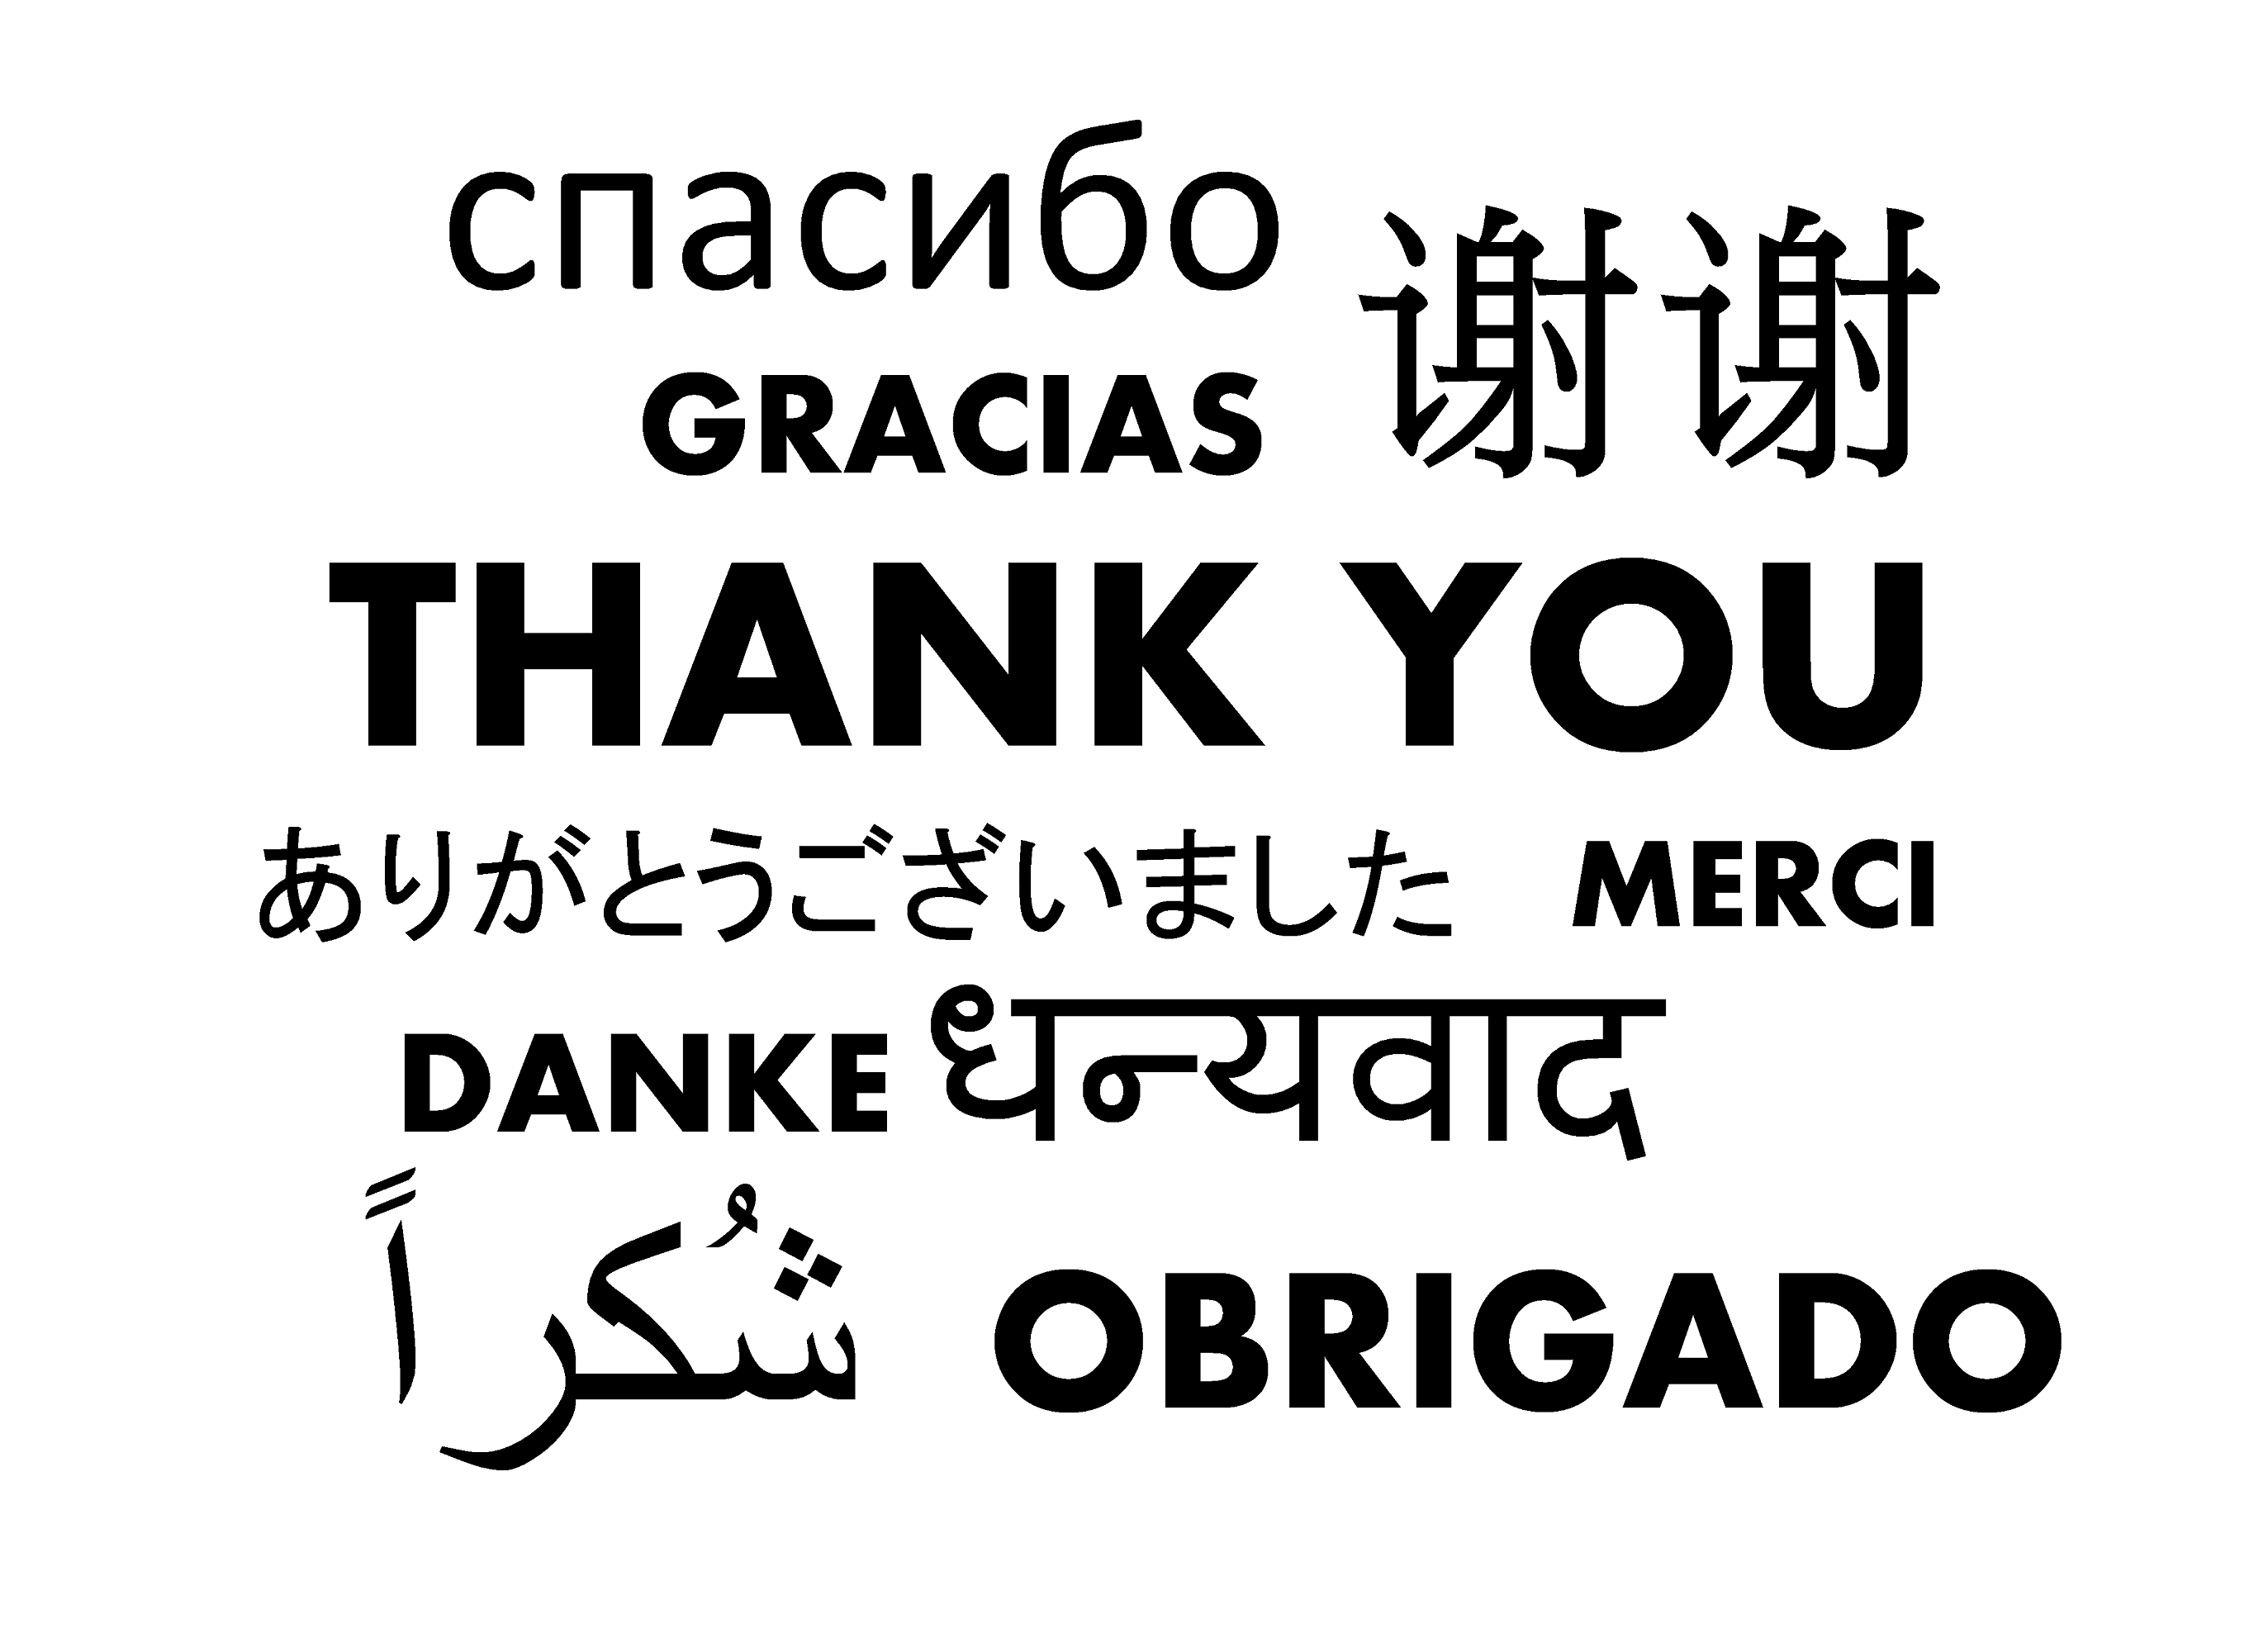 Thank you multiple languages